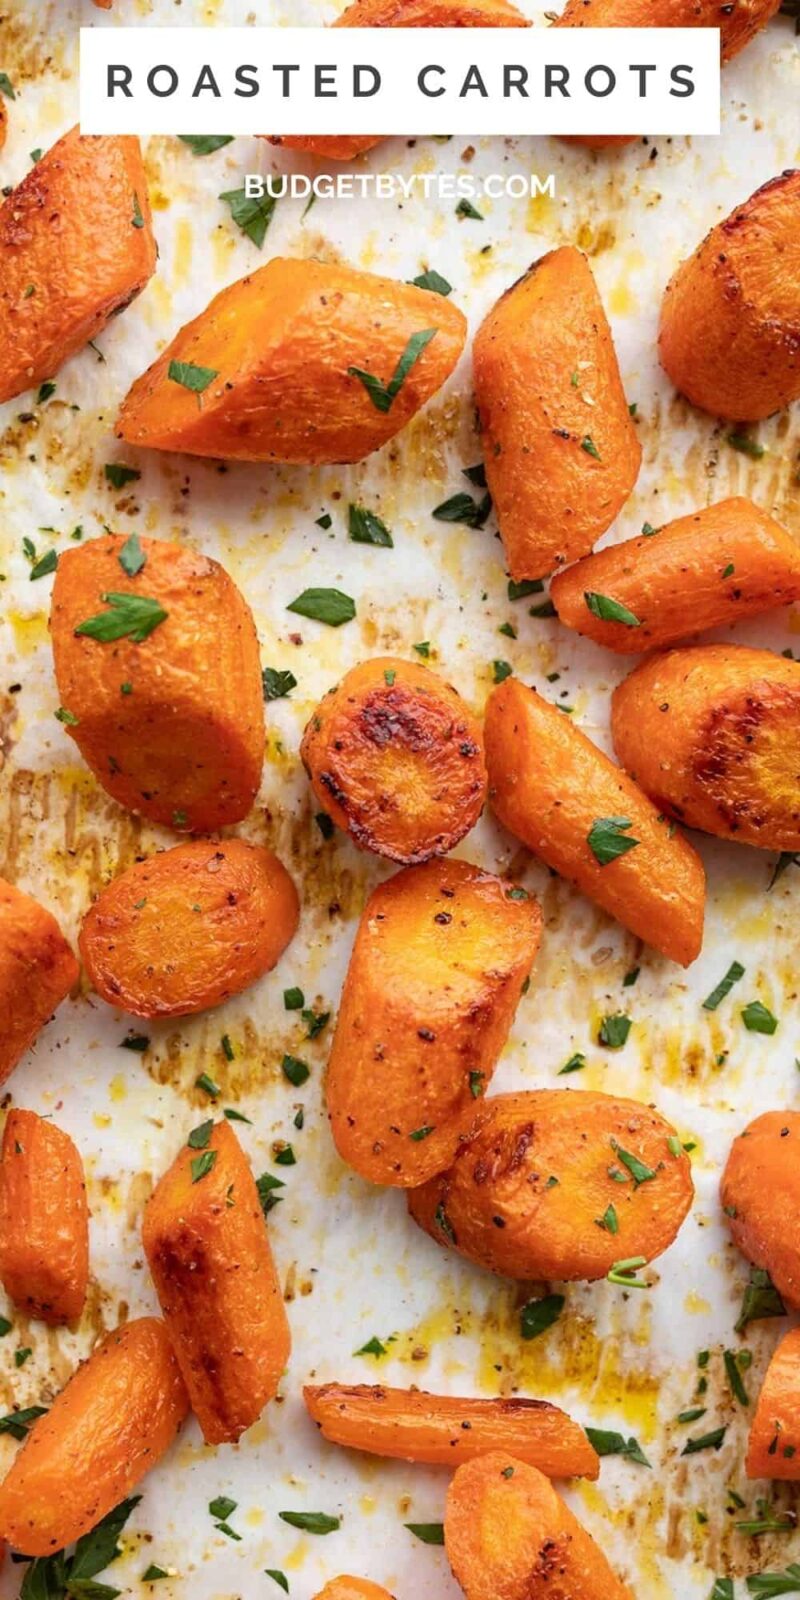 Roasted carrots on a baking sheet with the title text.